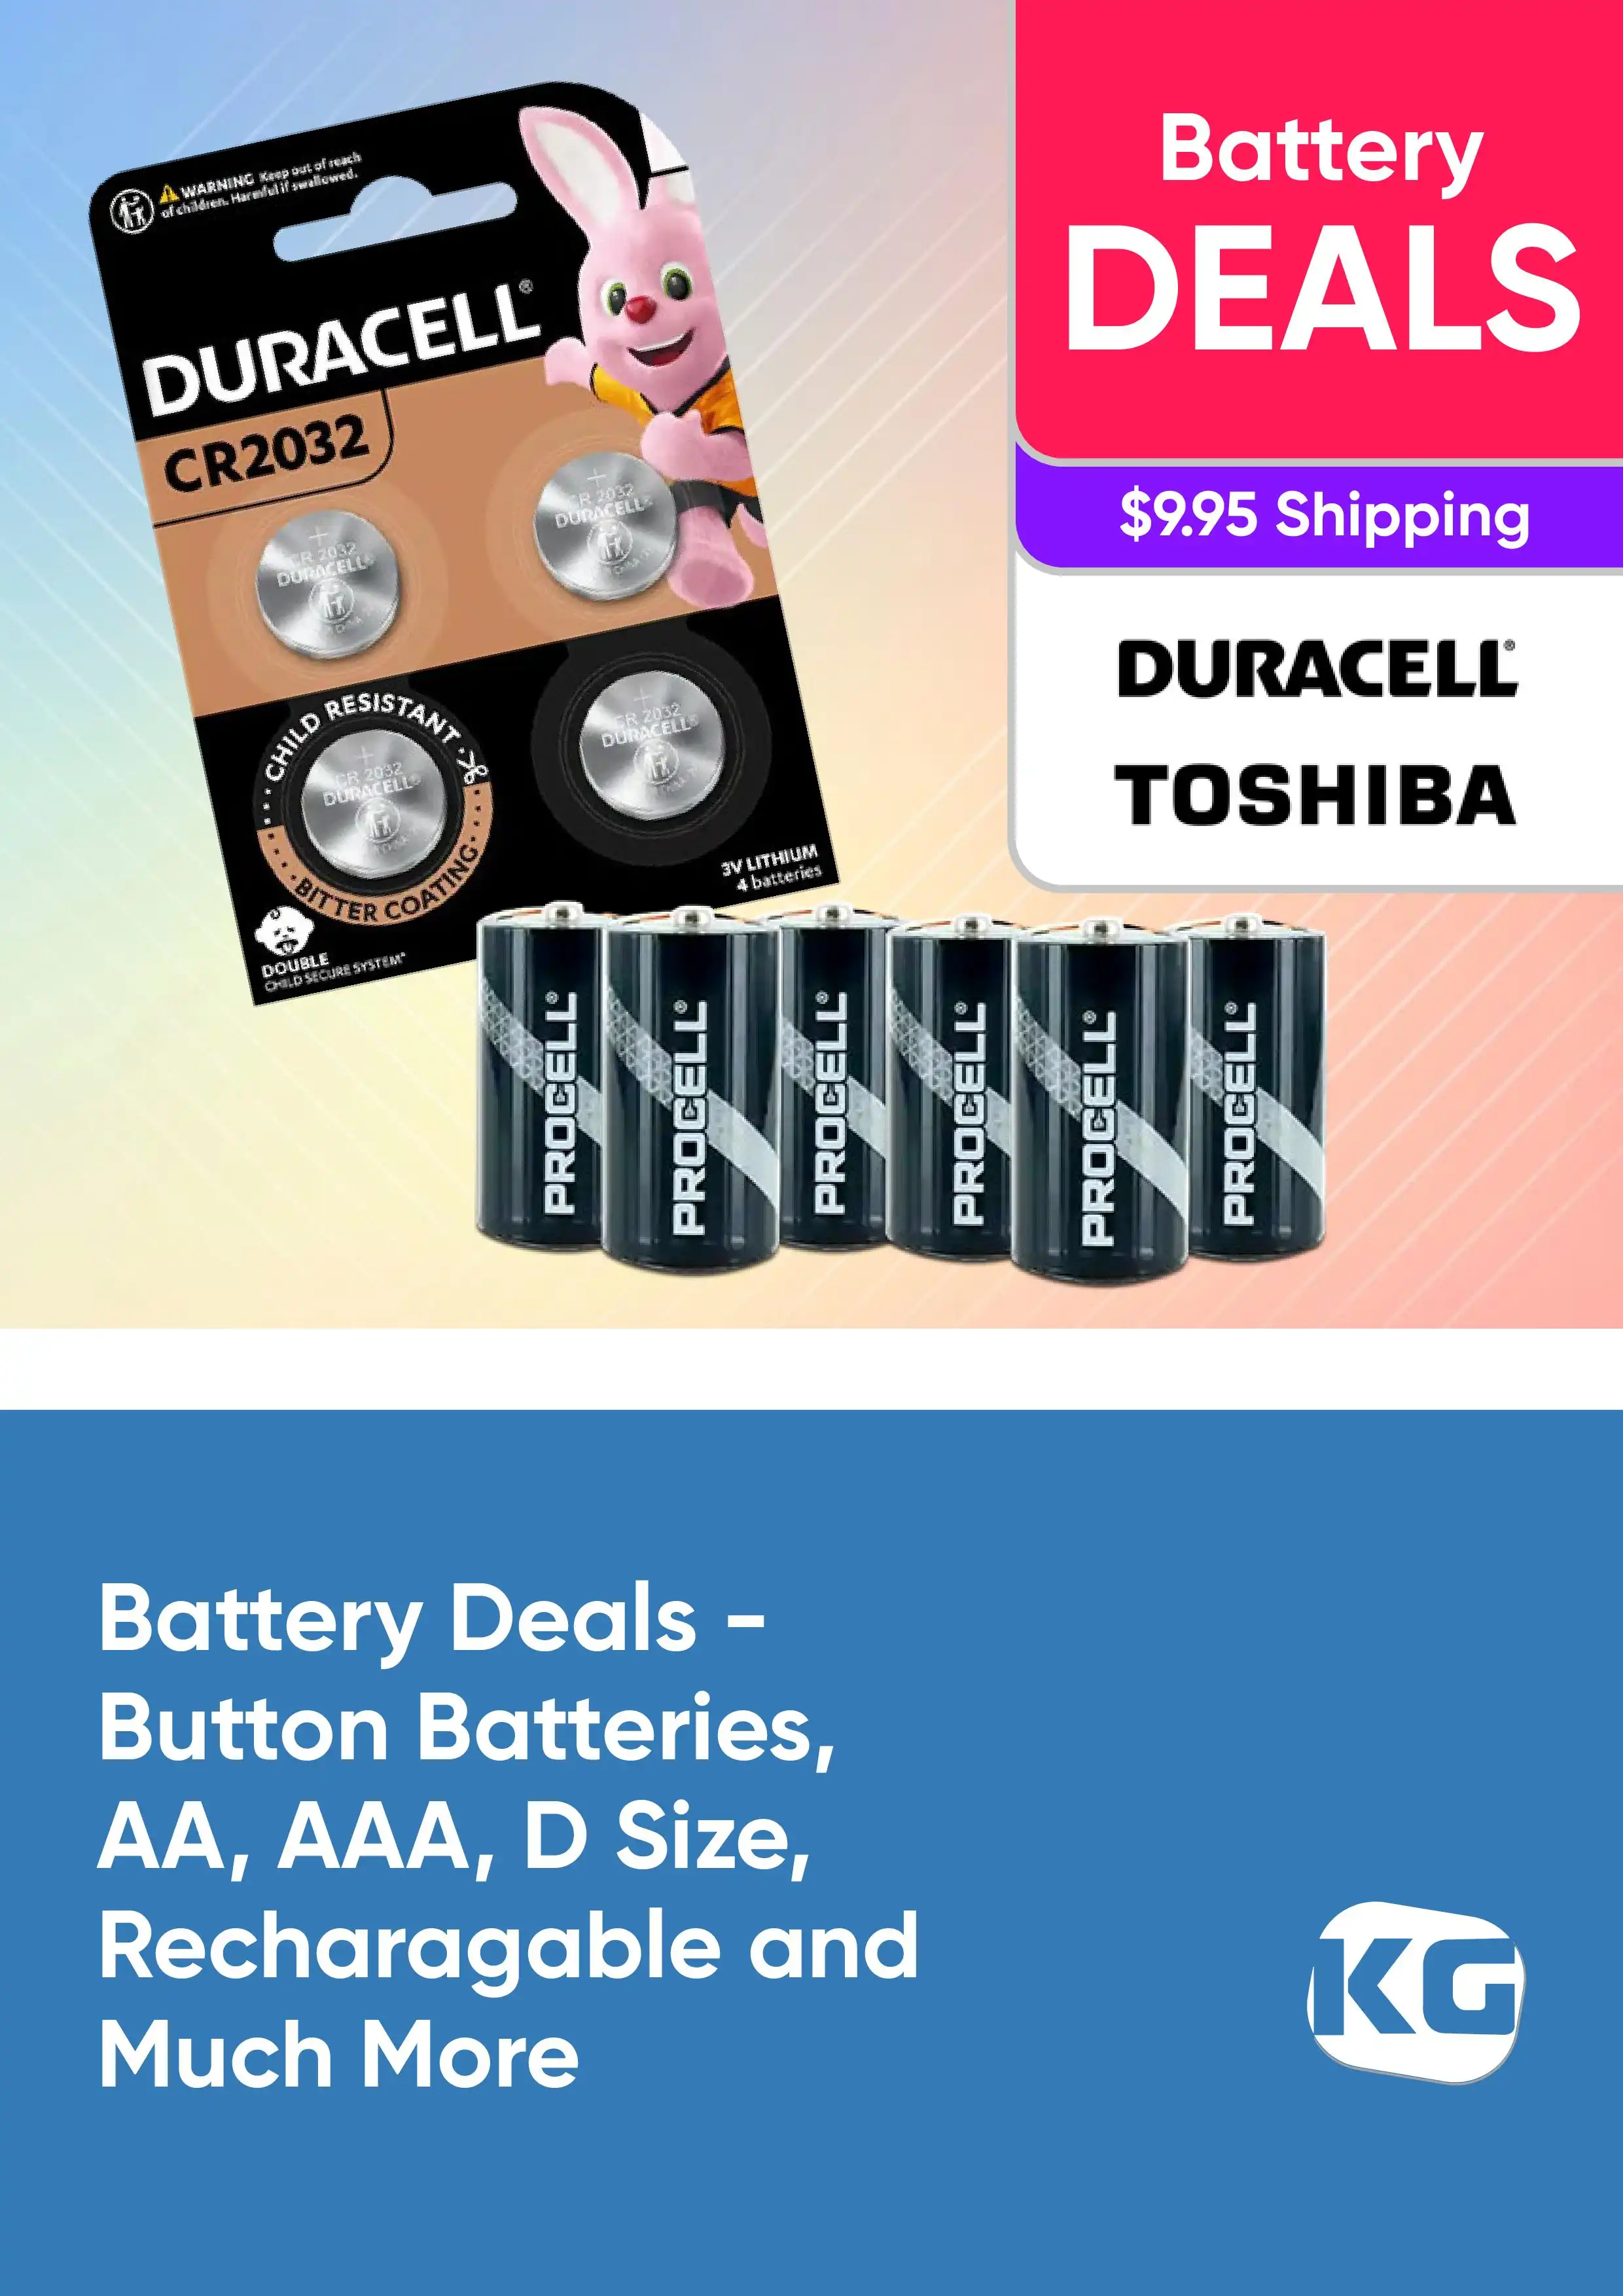 Battery Deals - Button Batteries, AA, AAA, D Size, Rechargeable and More